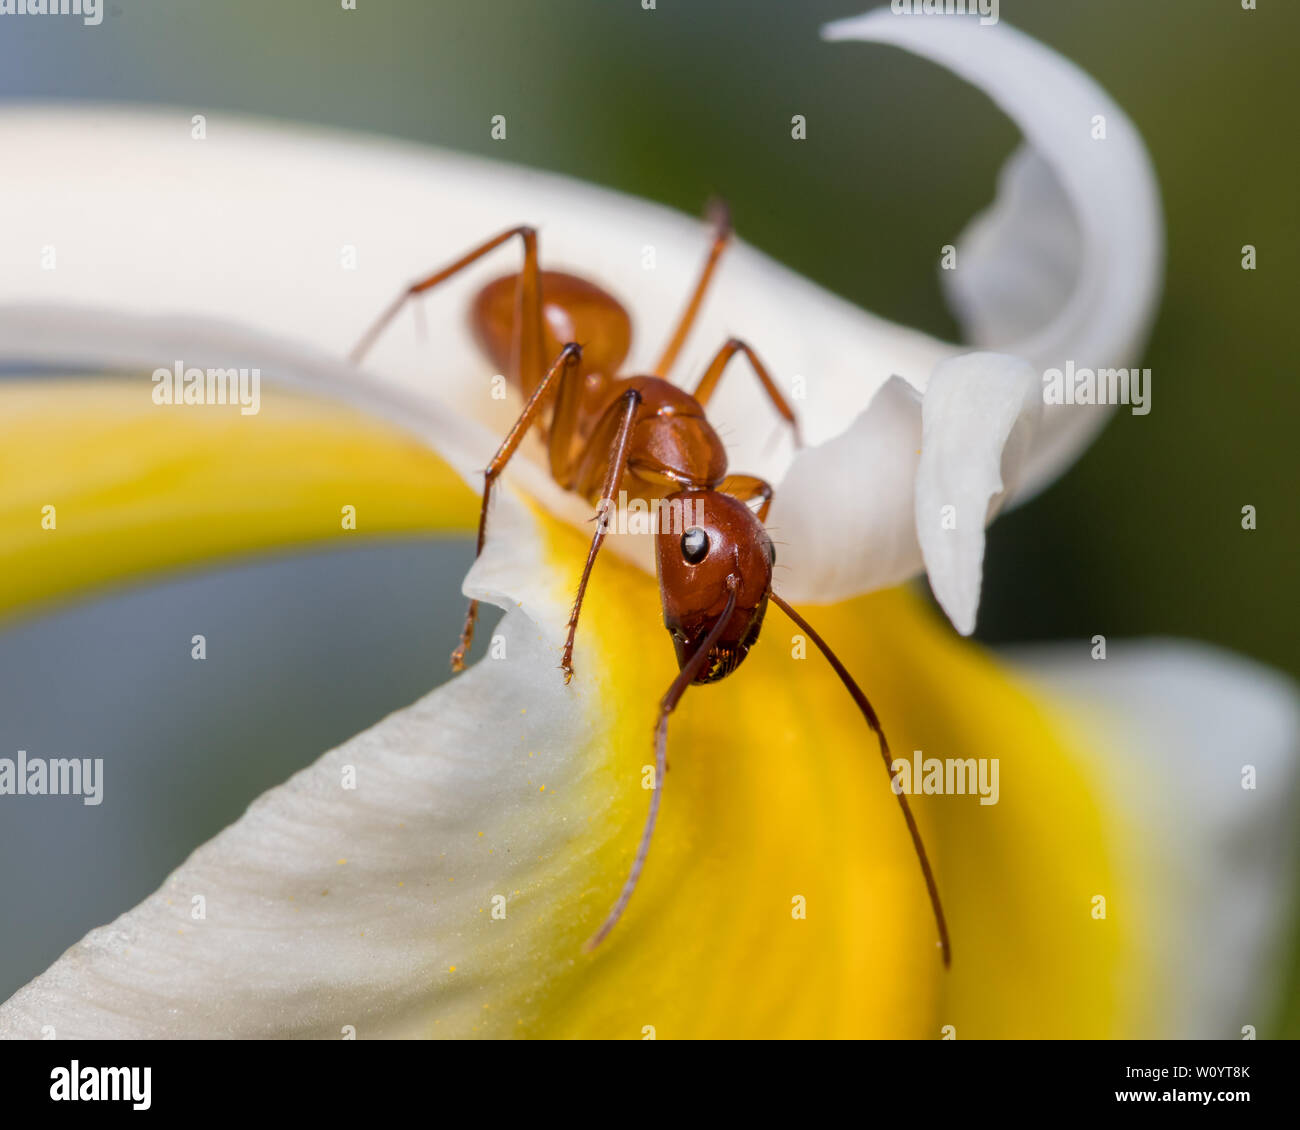 Large brown ant, Camponotus, climbing on flower Stock Photo